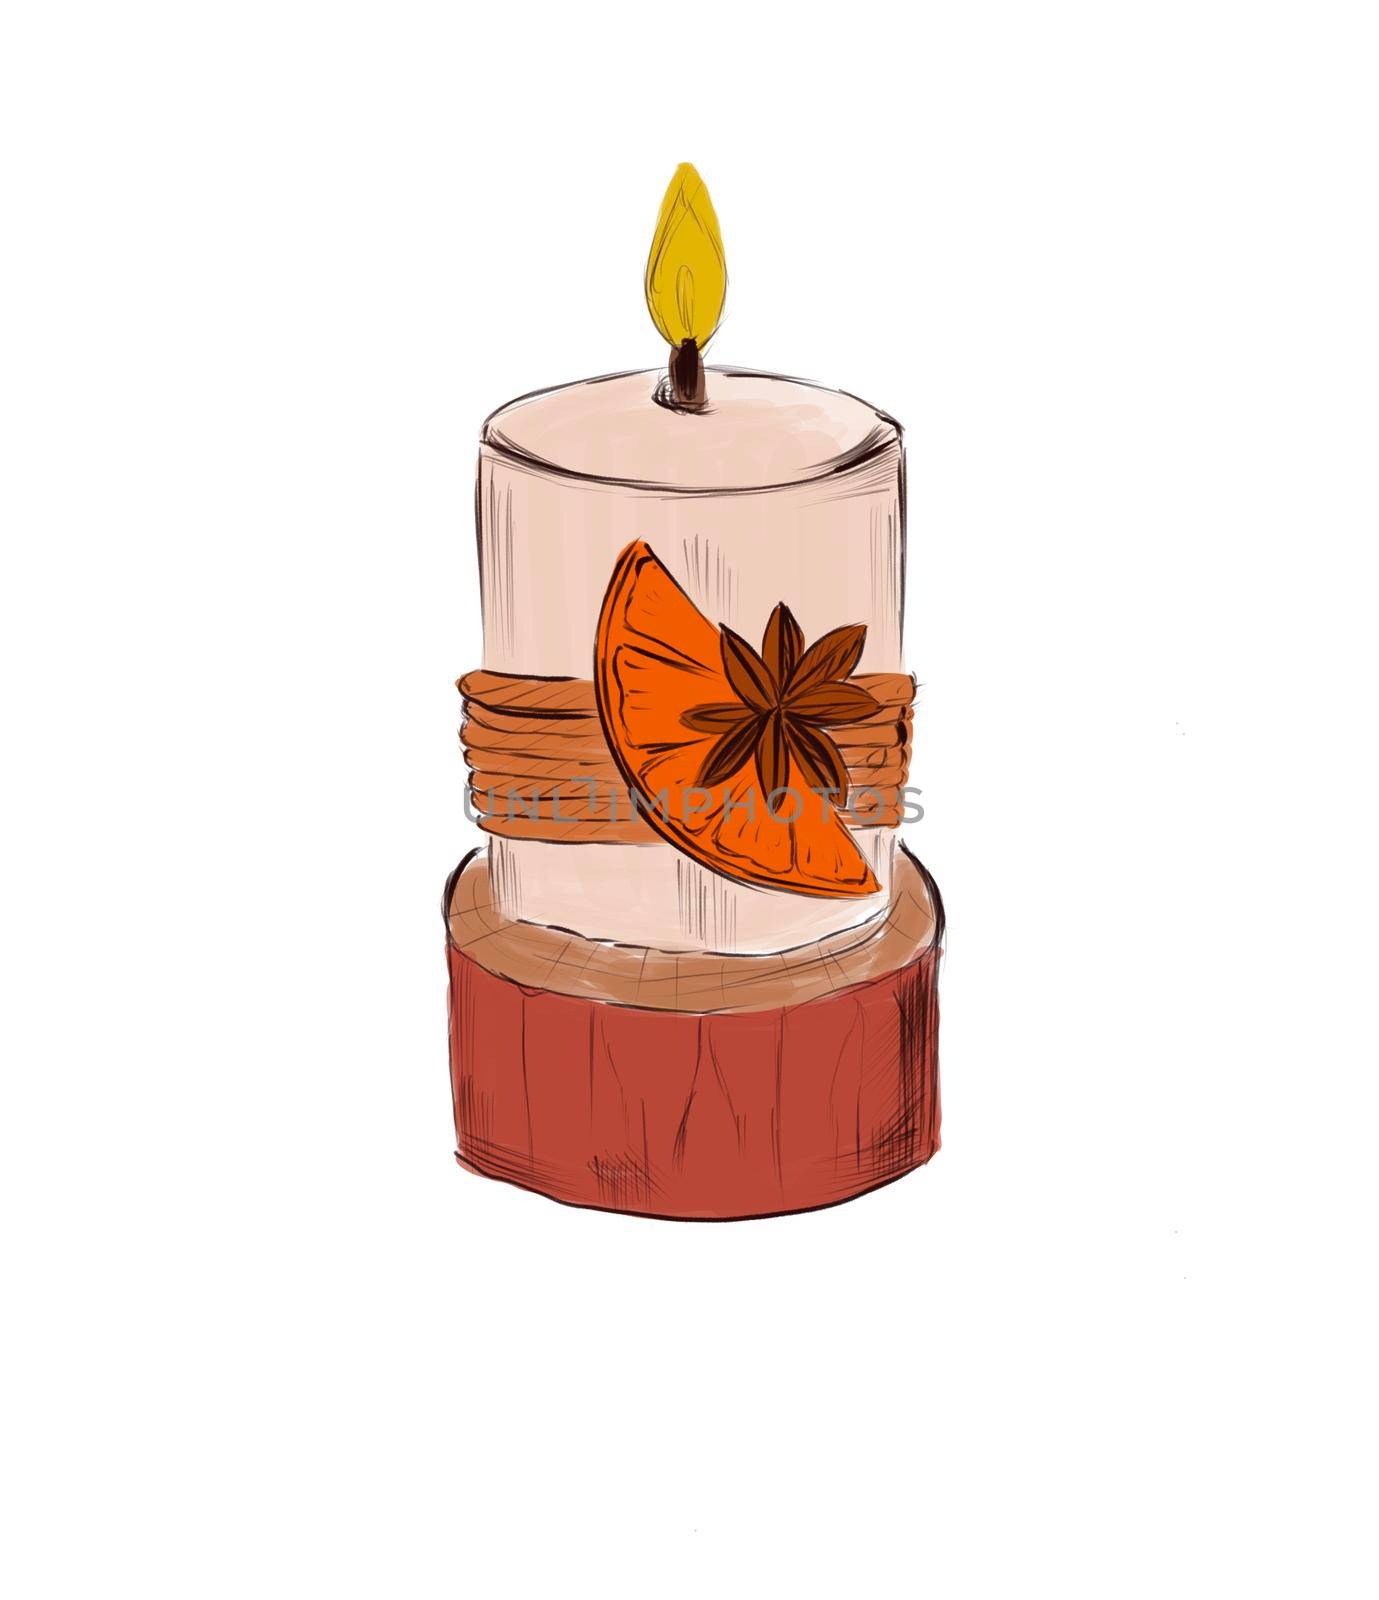 A lit candle. Wax candle illustration by Olga_OLiAN